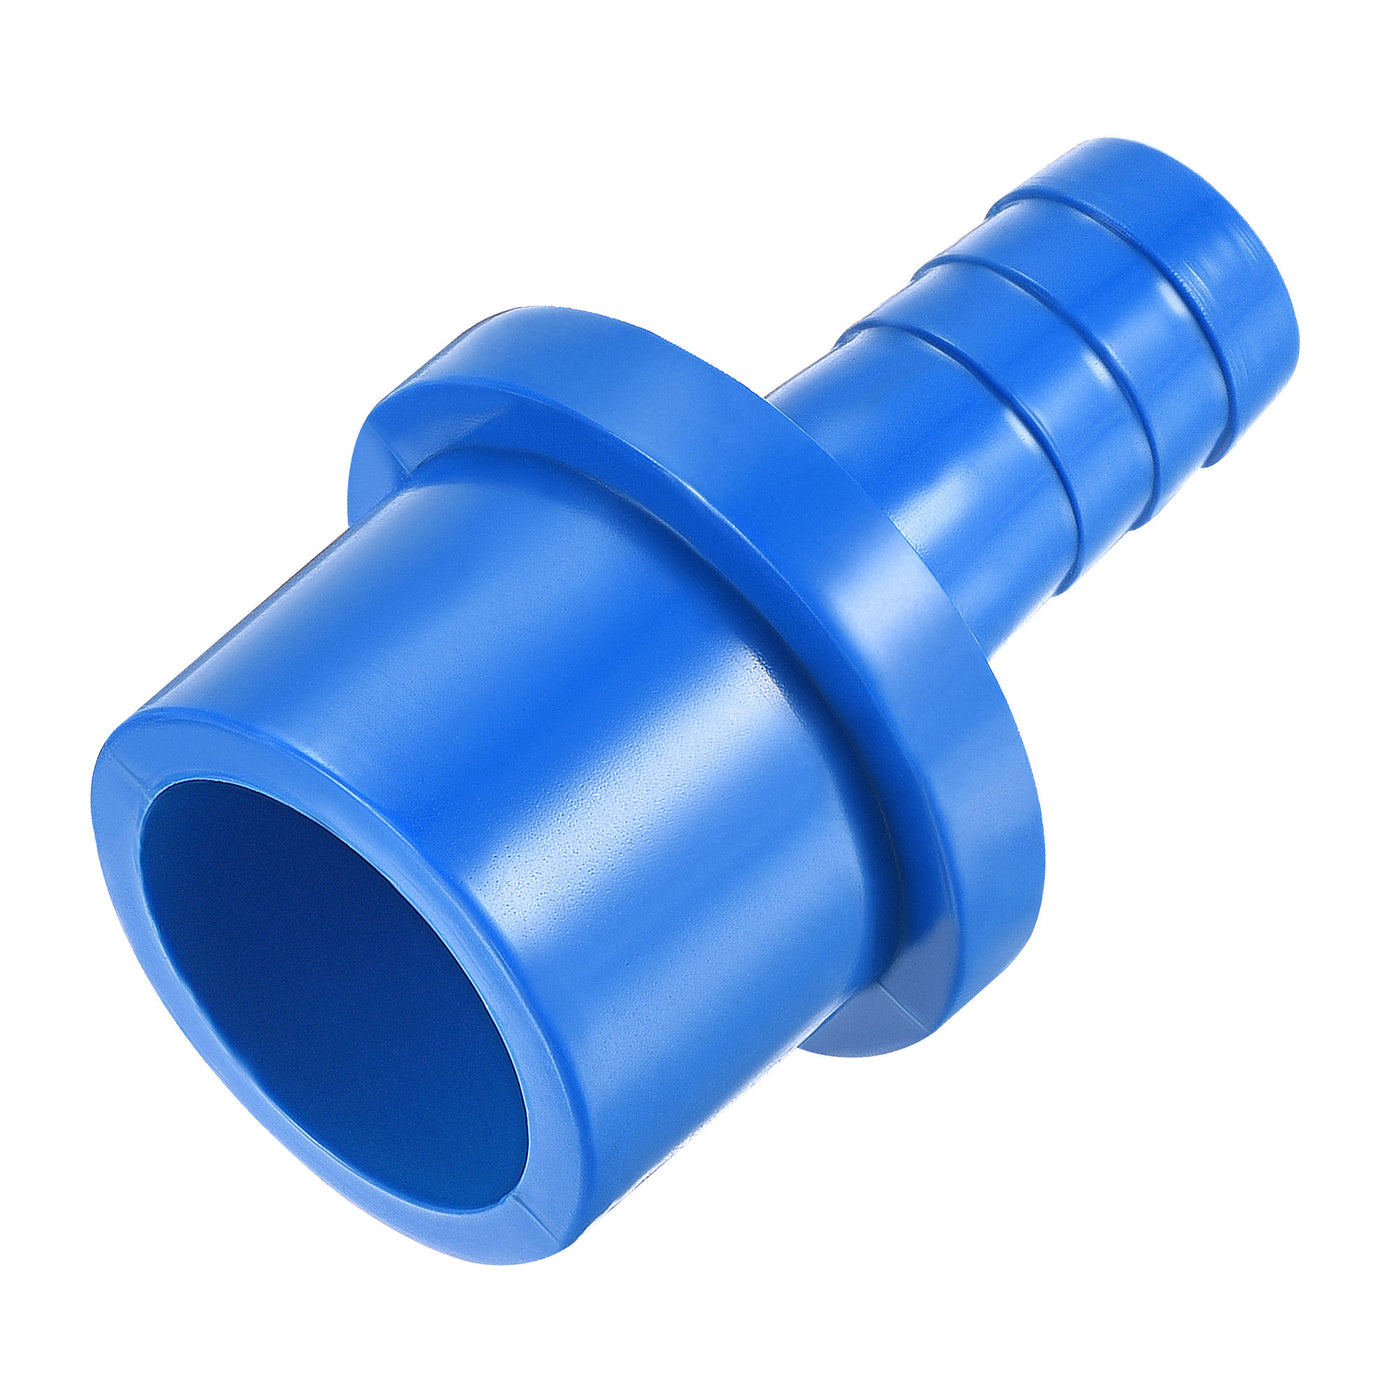 Harfington PVC Pipe Fitting 12mm Barbed x 25mm OD Spigot Straight Hose Connector Blue